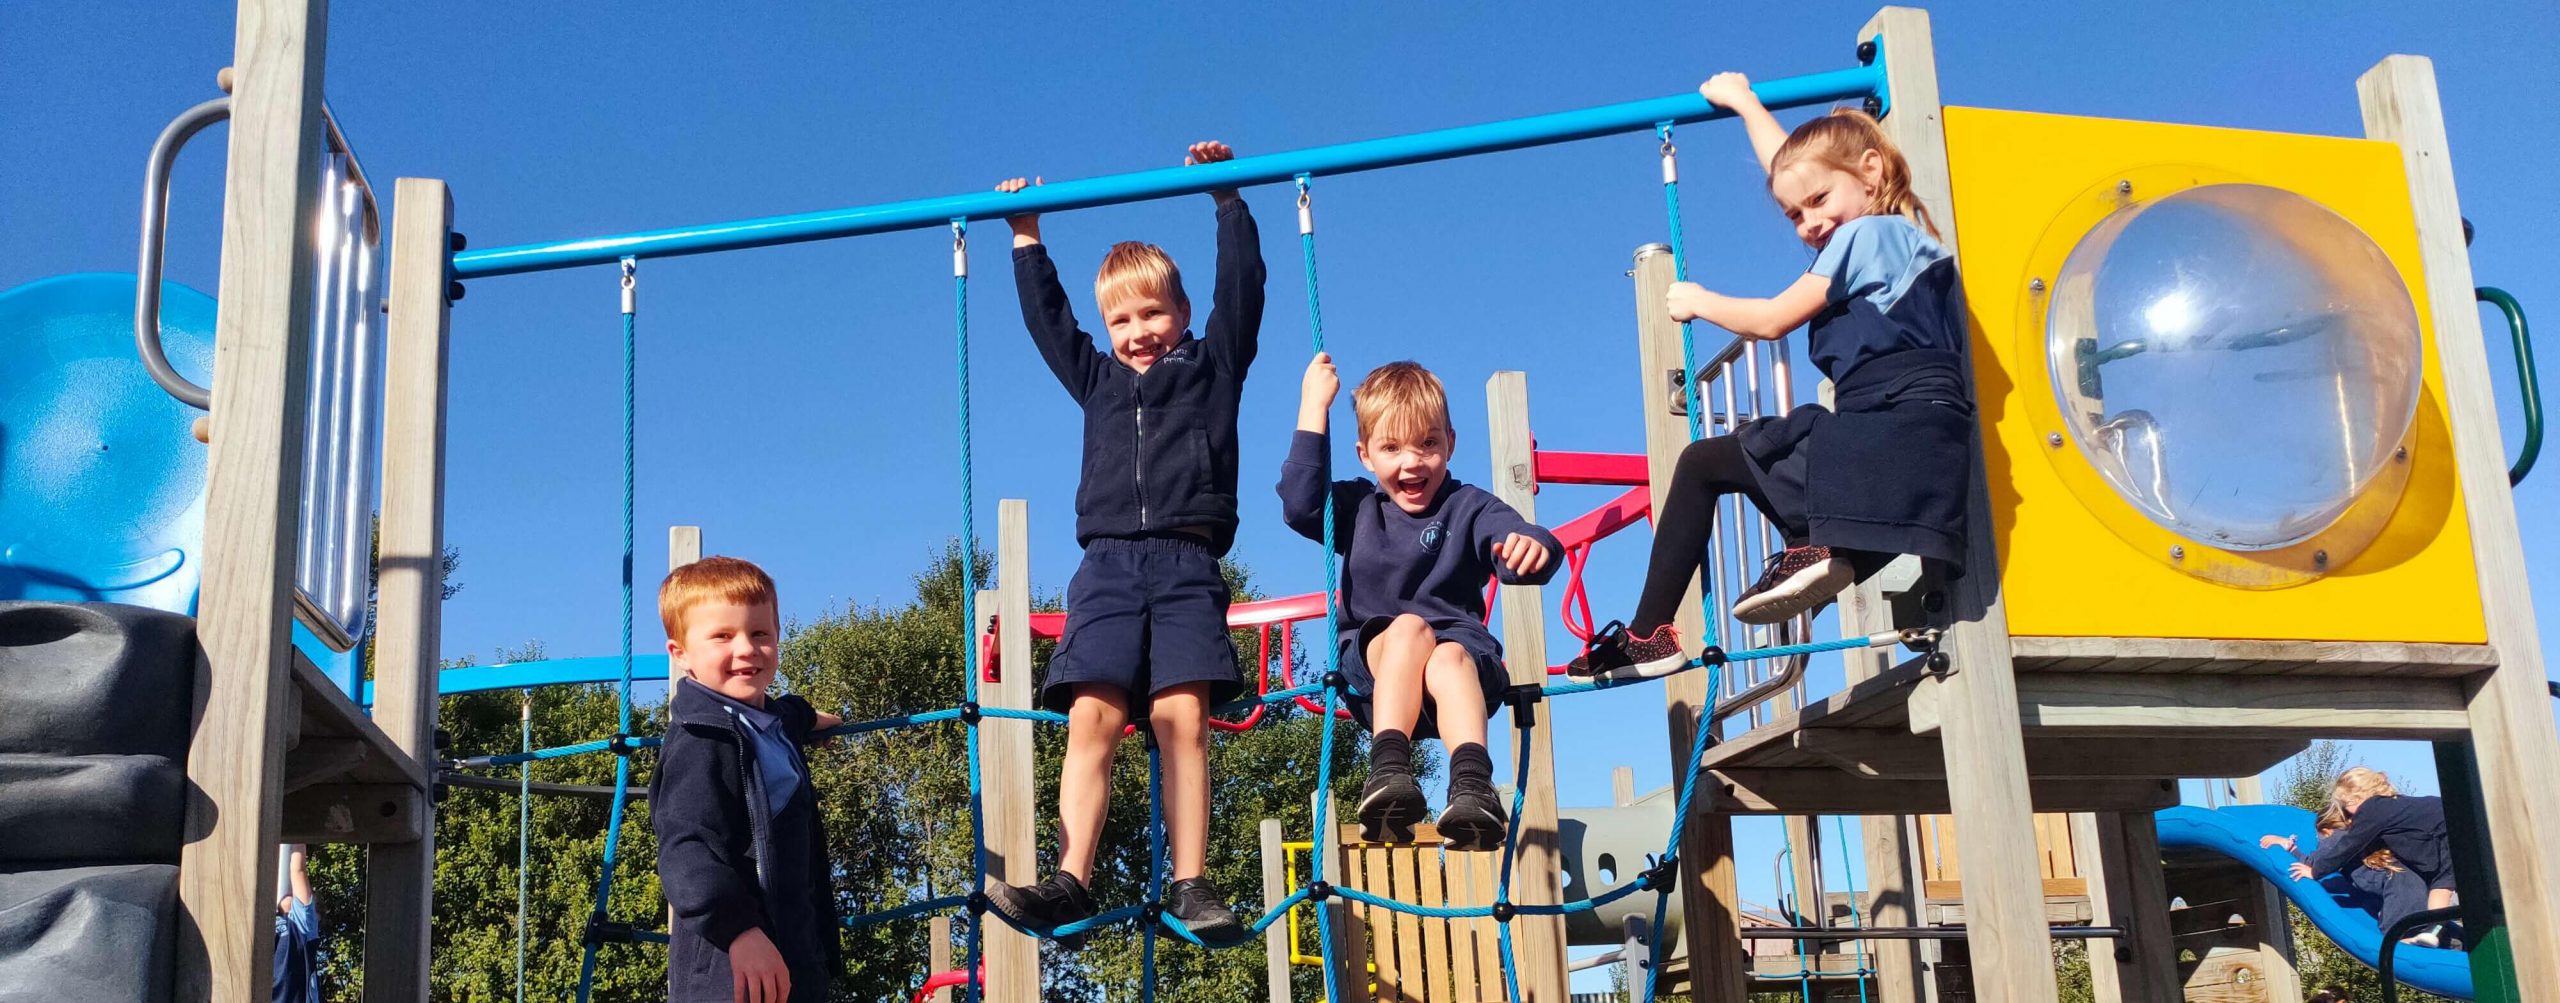 4 Papanui Primary students playing on climbing ropes